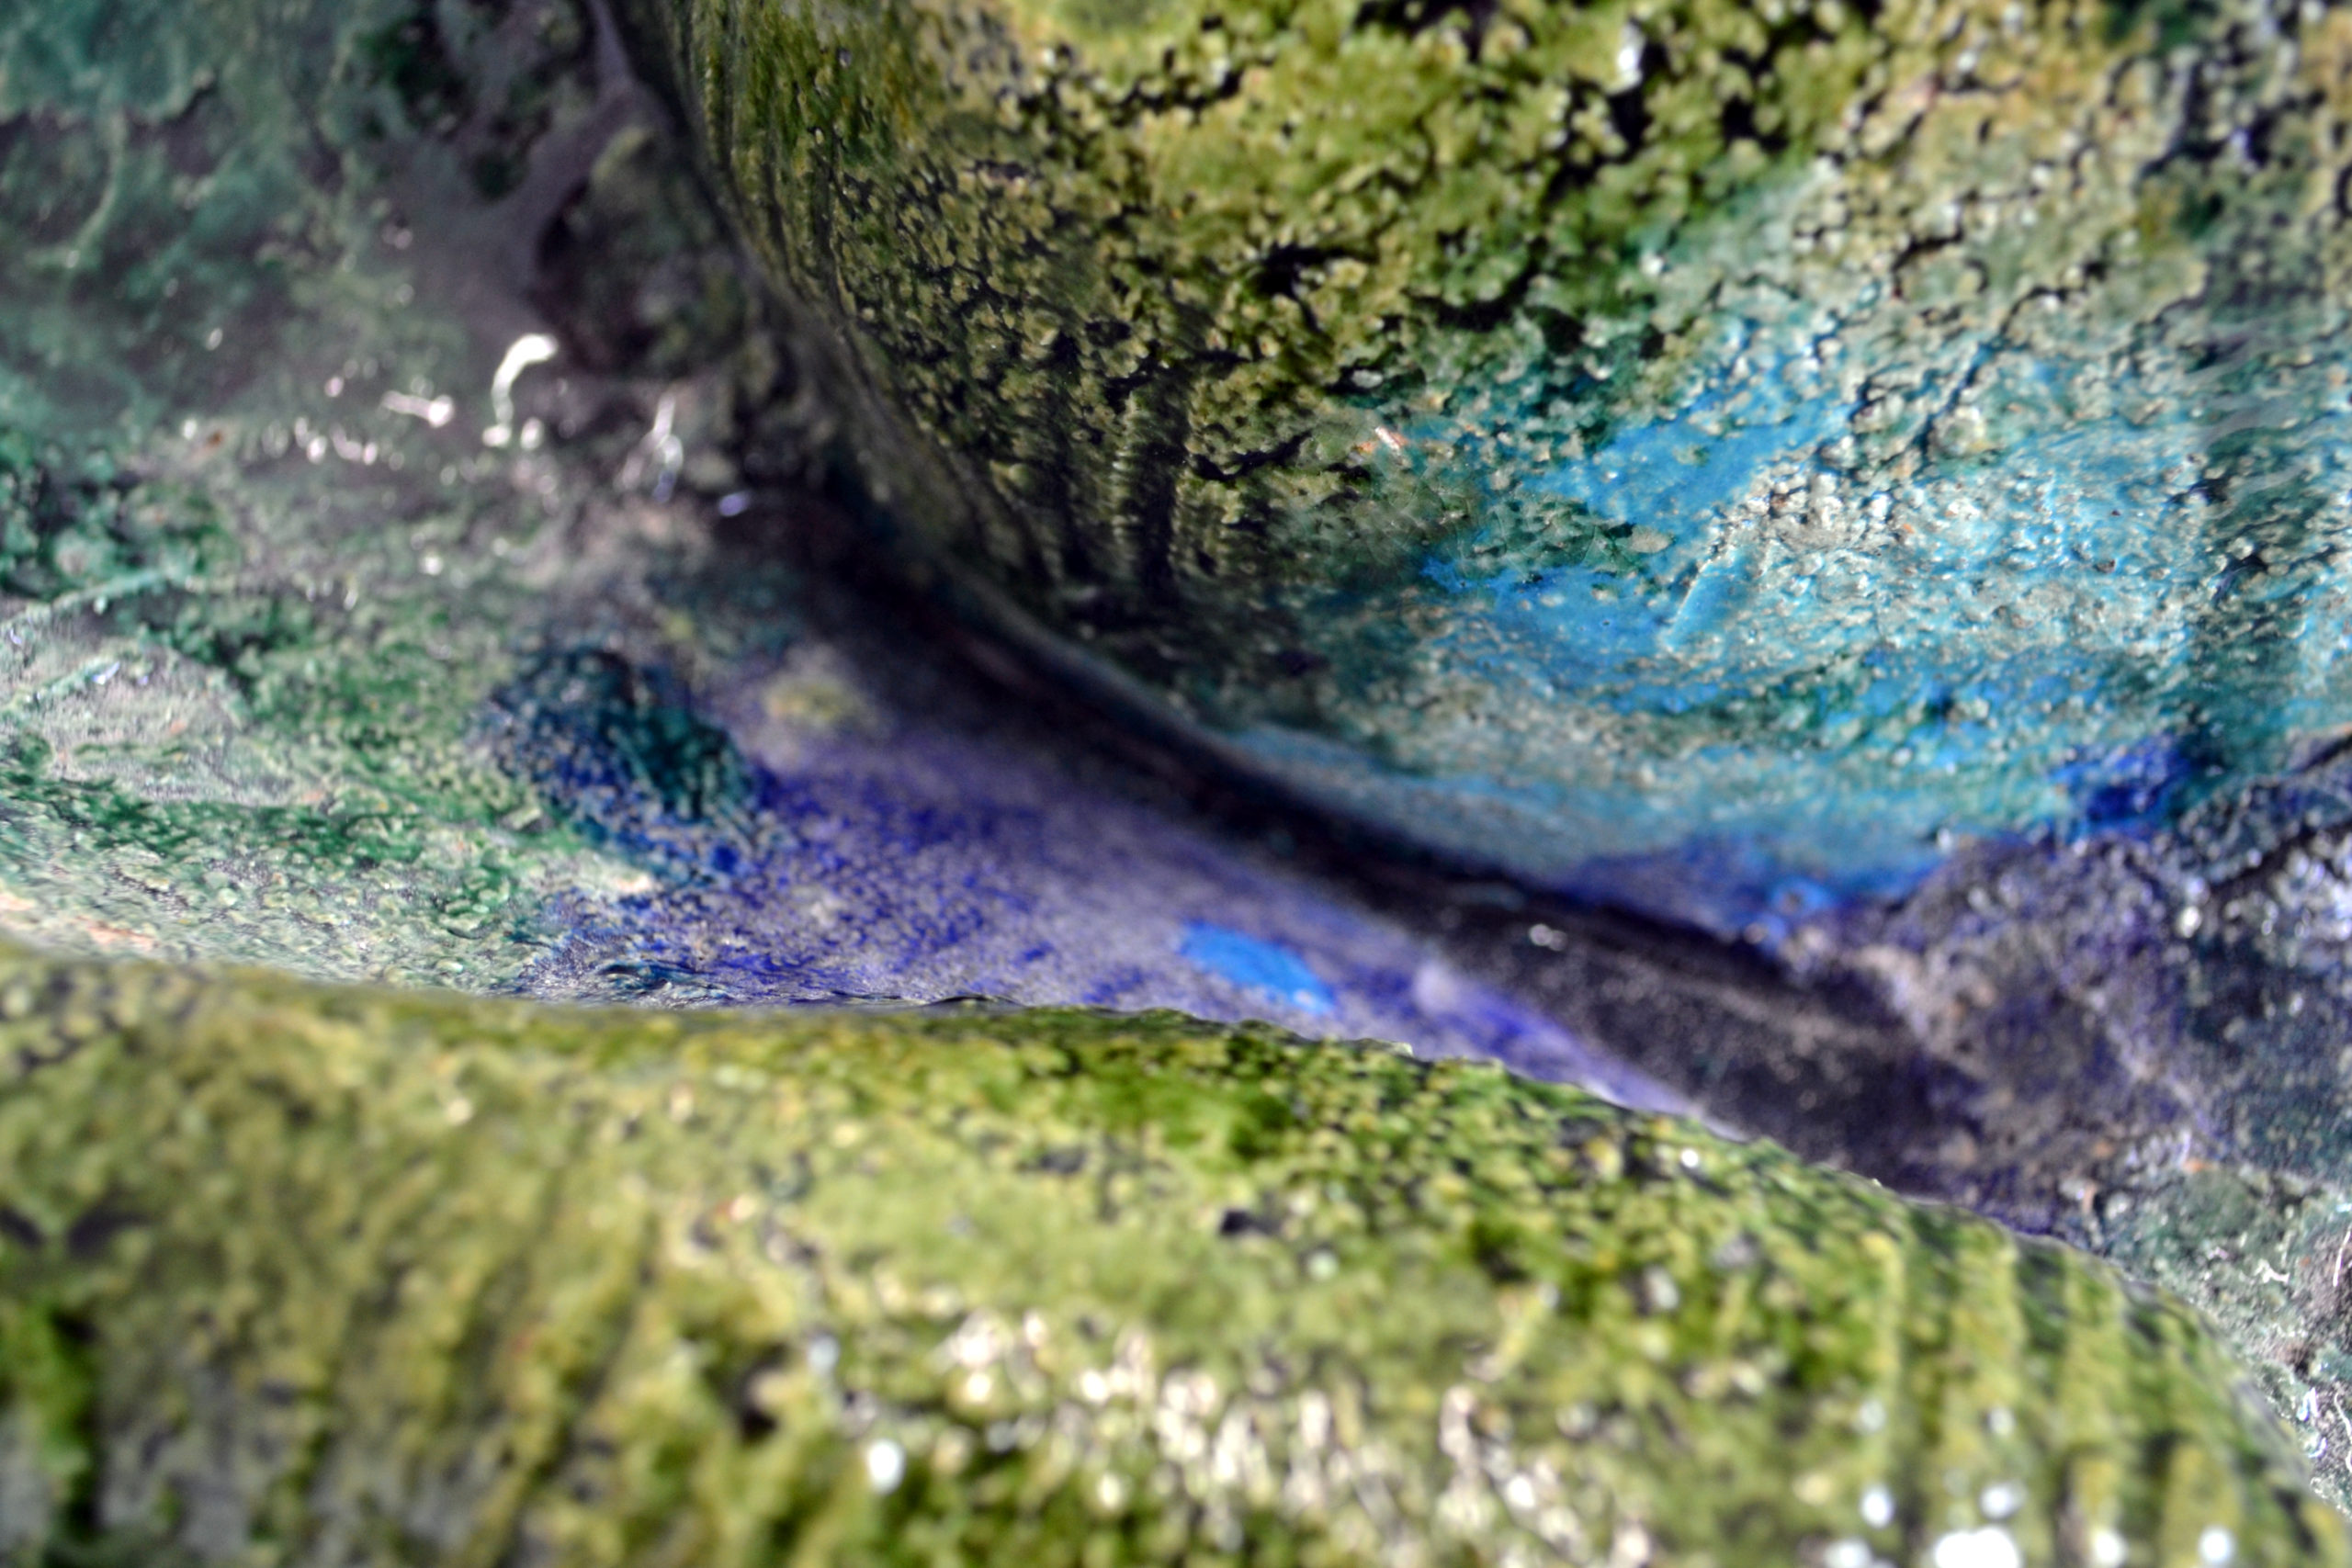 Detail of the sculpture "Corps Paysage #1" by Barbara Bauer artist, with green and blue glazing